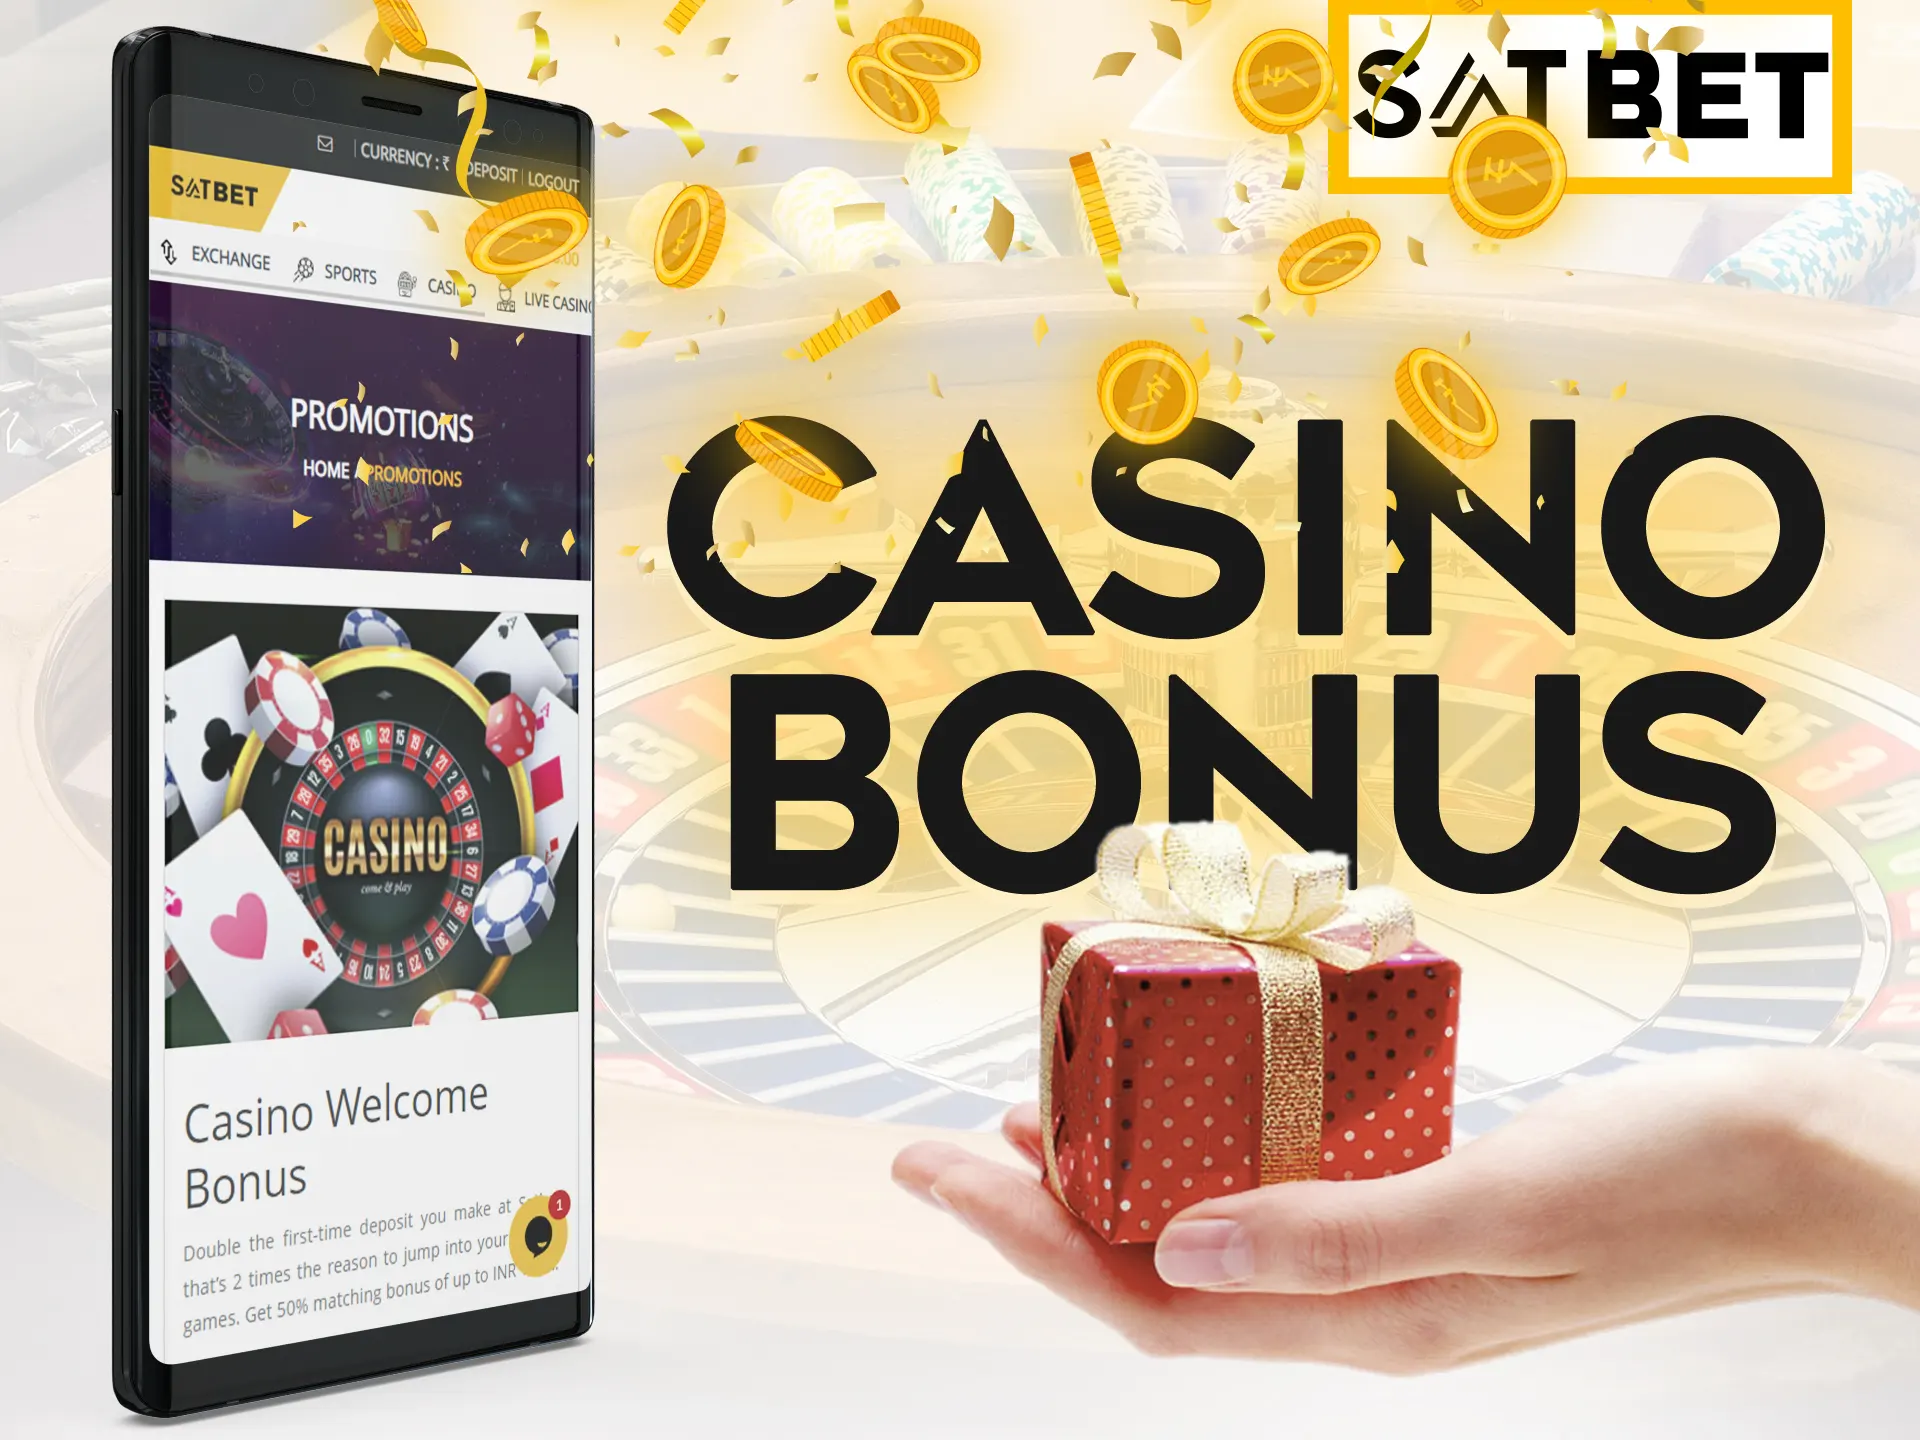 Get your Satbet casino bonus by playing it.